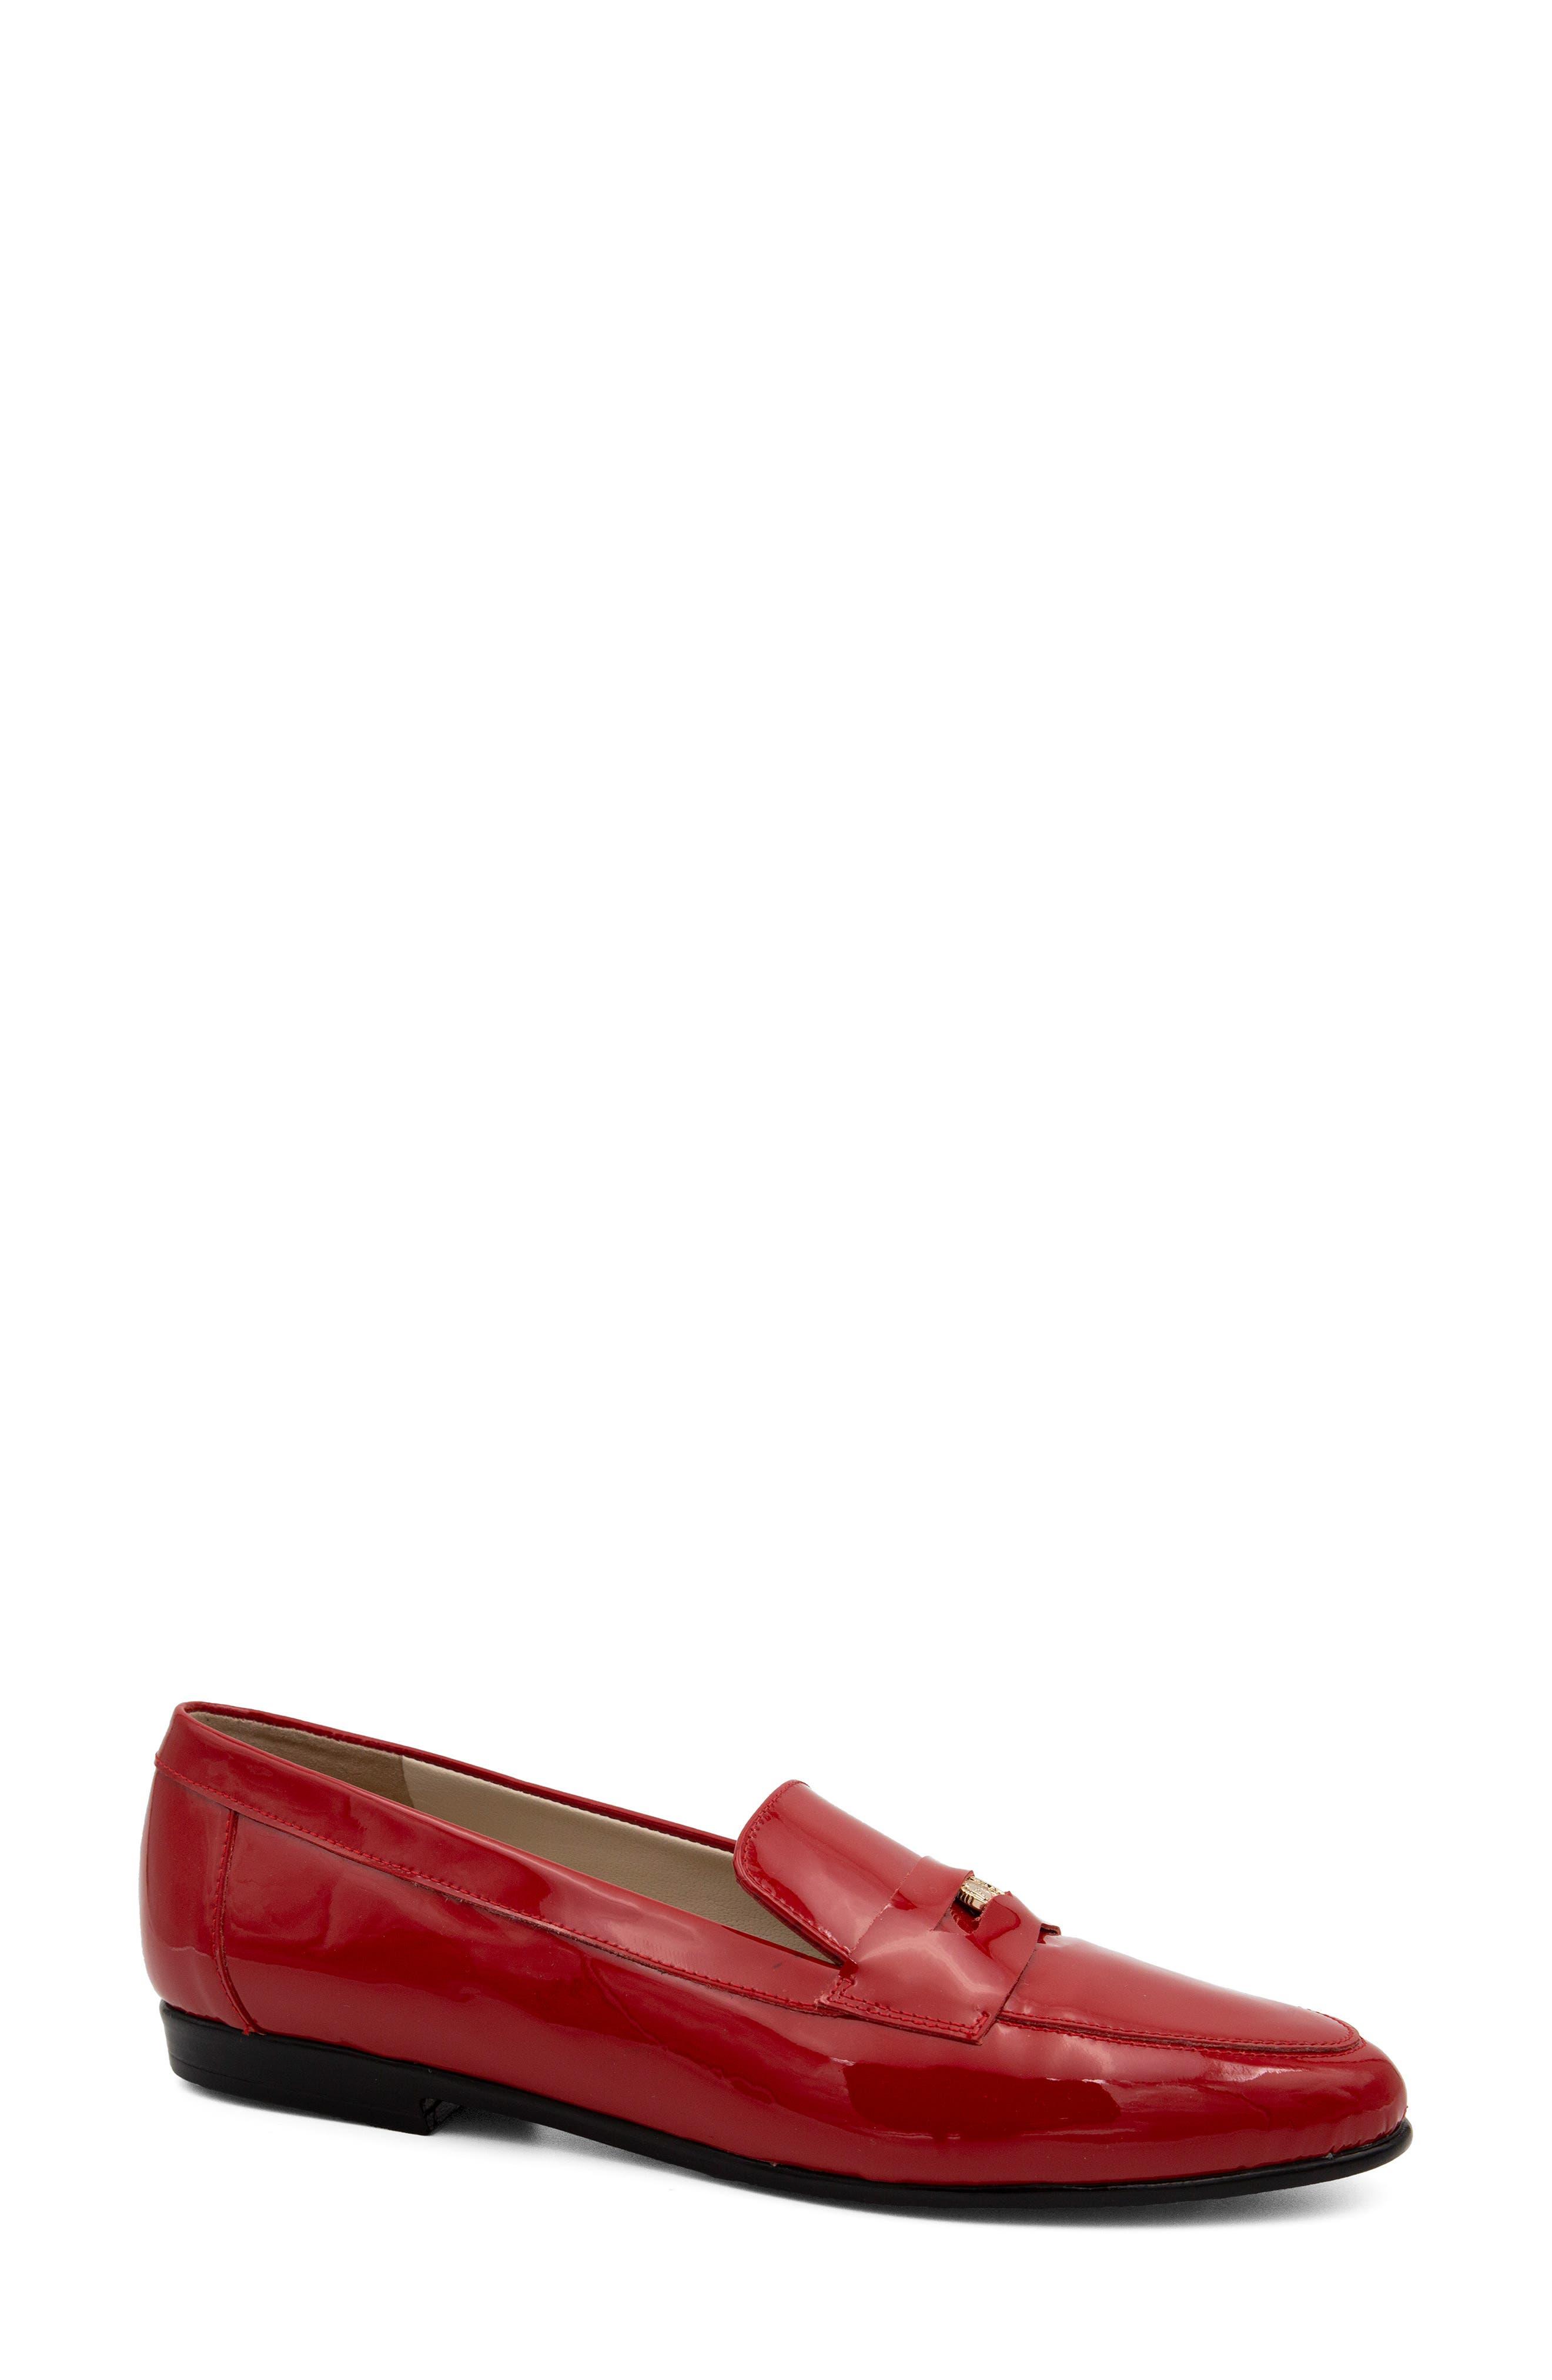 Amalfi by Rangoni Ornella Penny Loafer in Red | Lyst